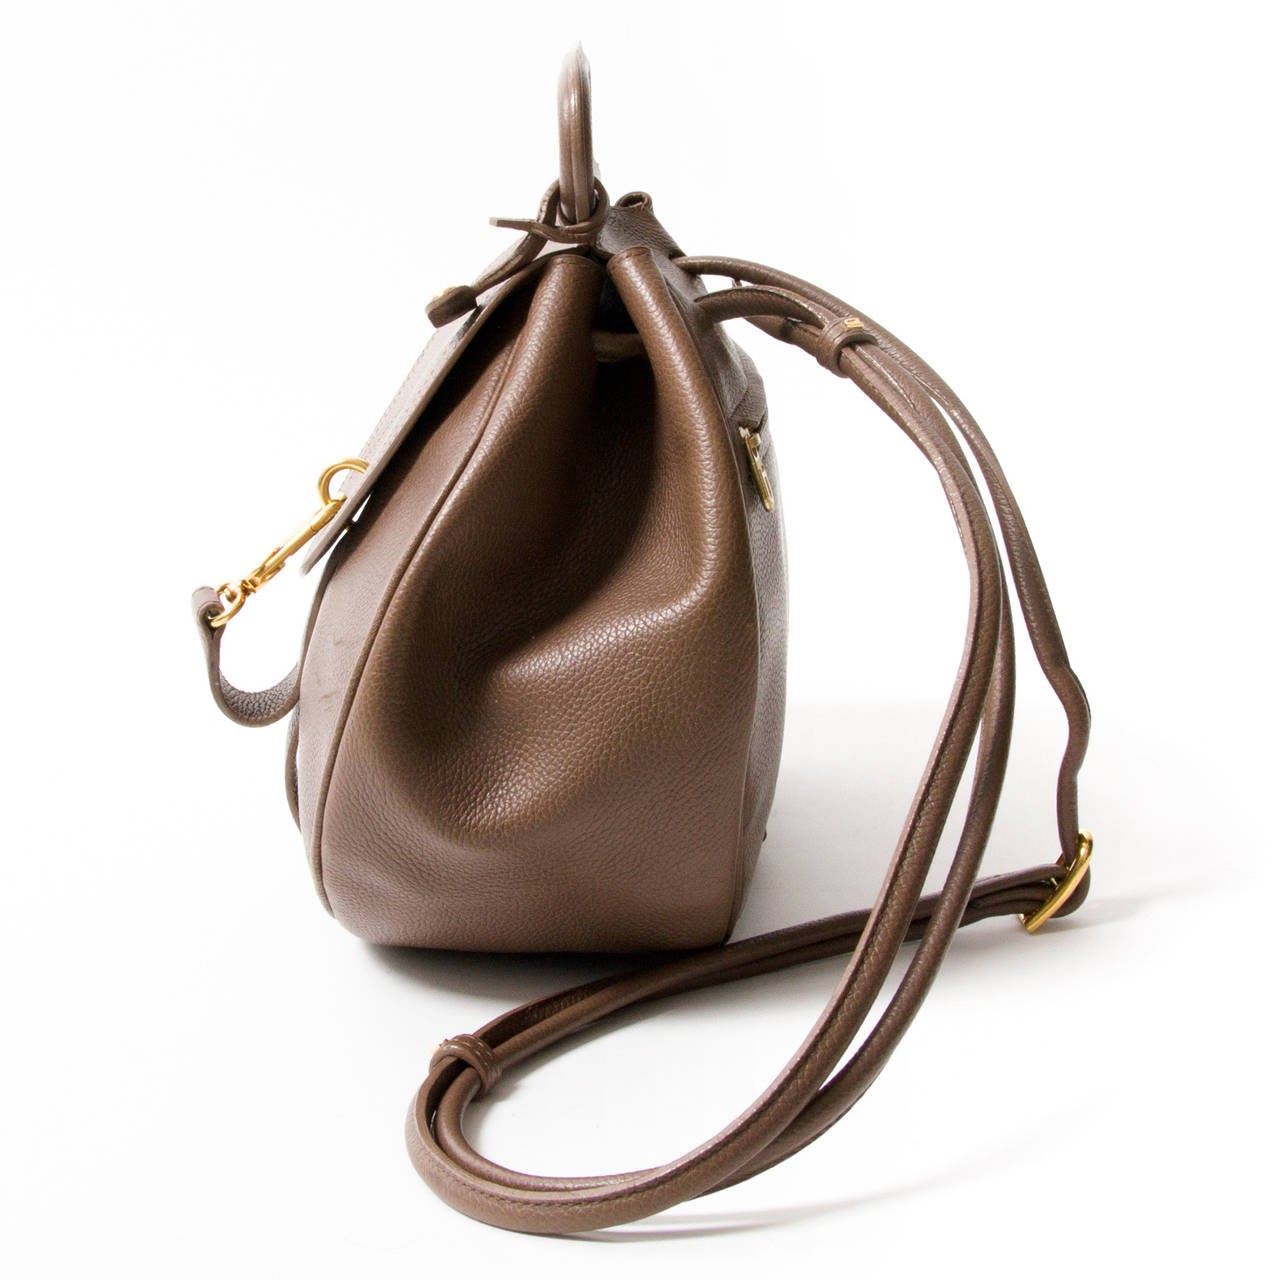 Multifunctional Delvaux brown 'Cerceau' Jumping Bag with golden hardware throughout.
Inside cell phone pocket and keyholder 
Wear it as a shoulder bag or wear it as a backpack.